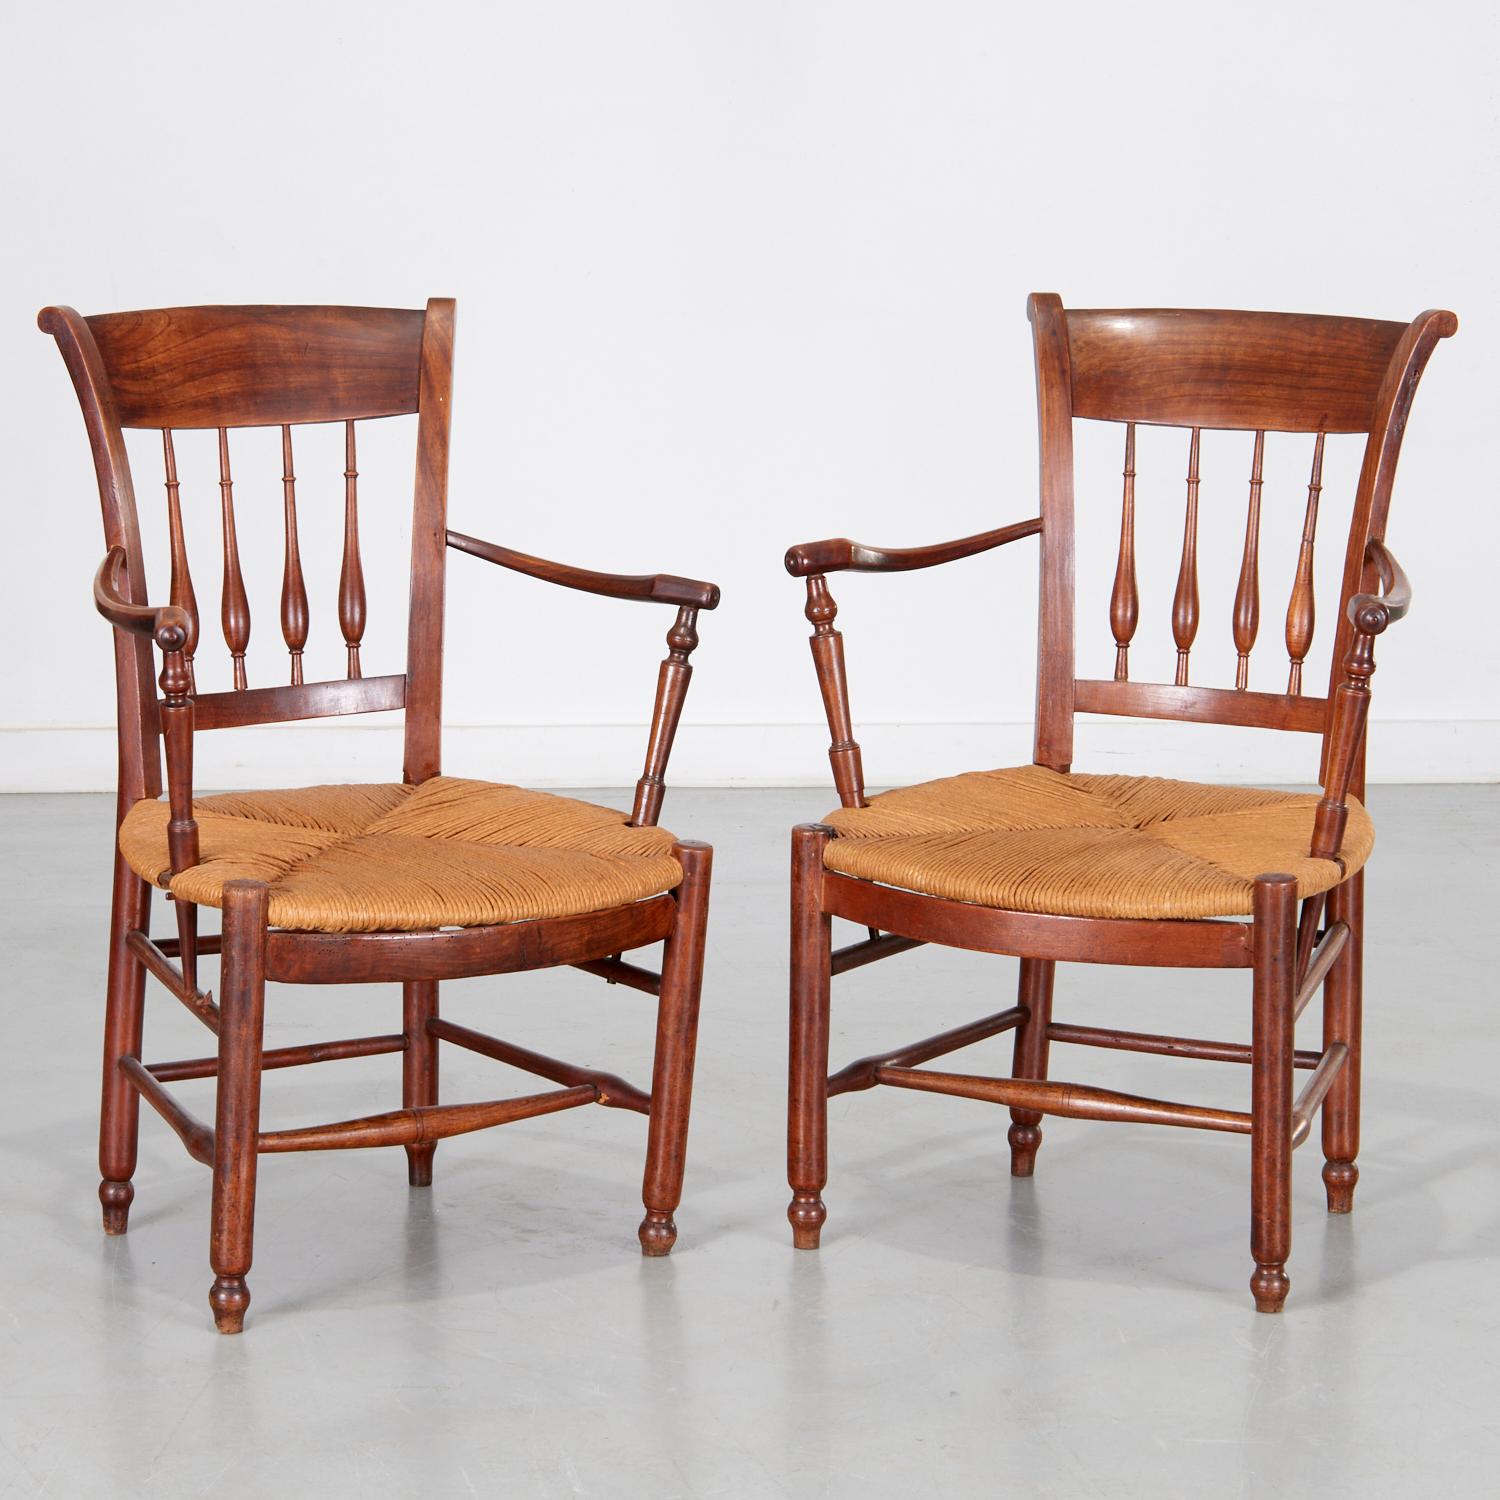 Antique Pair of French Provincial Turned Wood Arm Chairs with Rush Seats For Sale 2